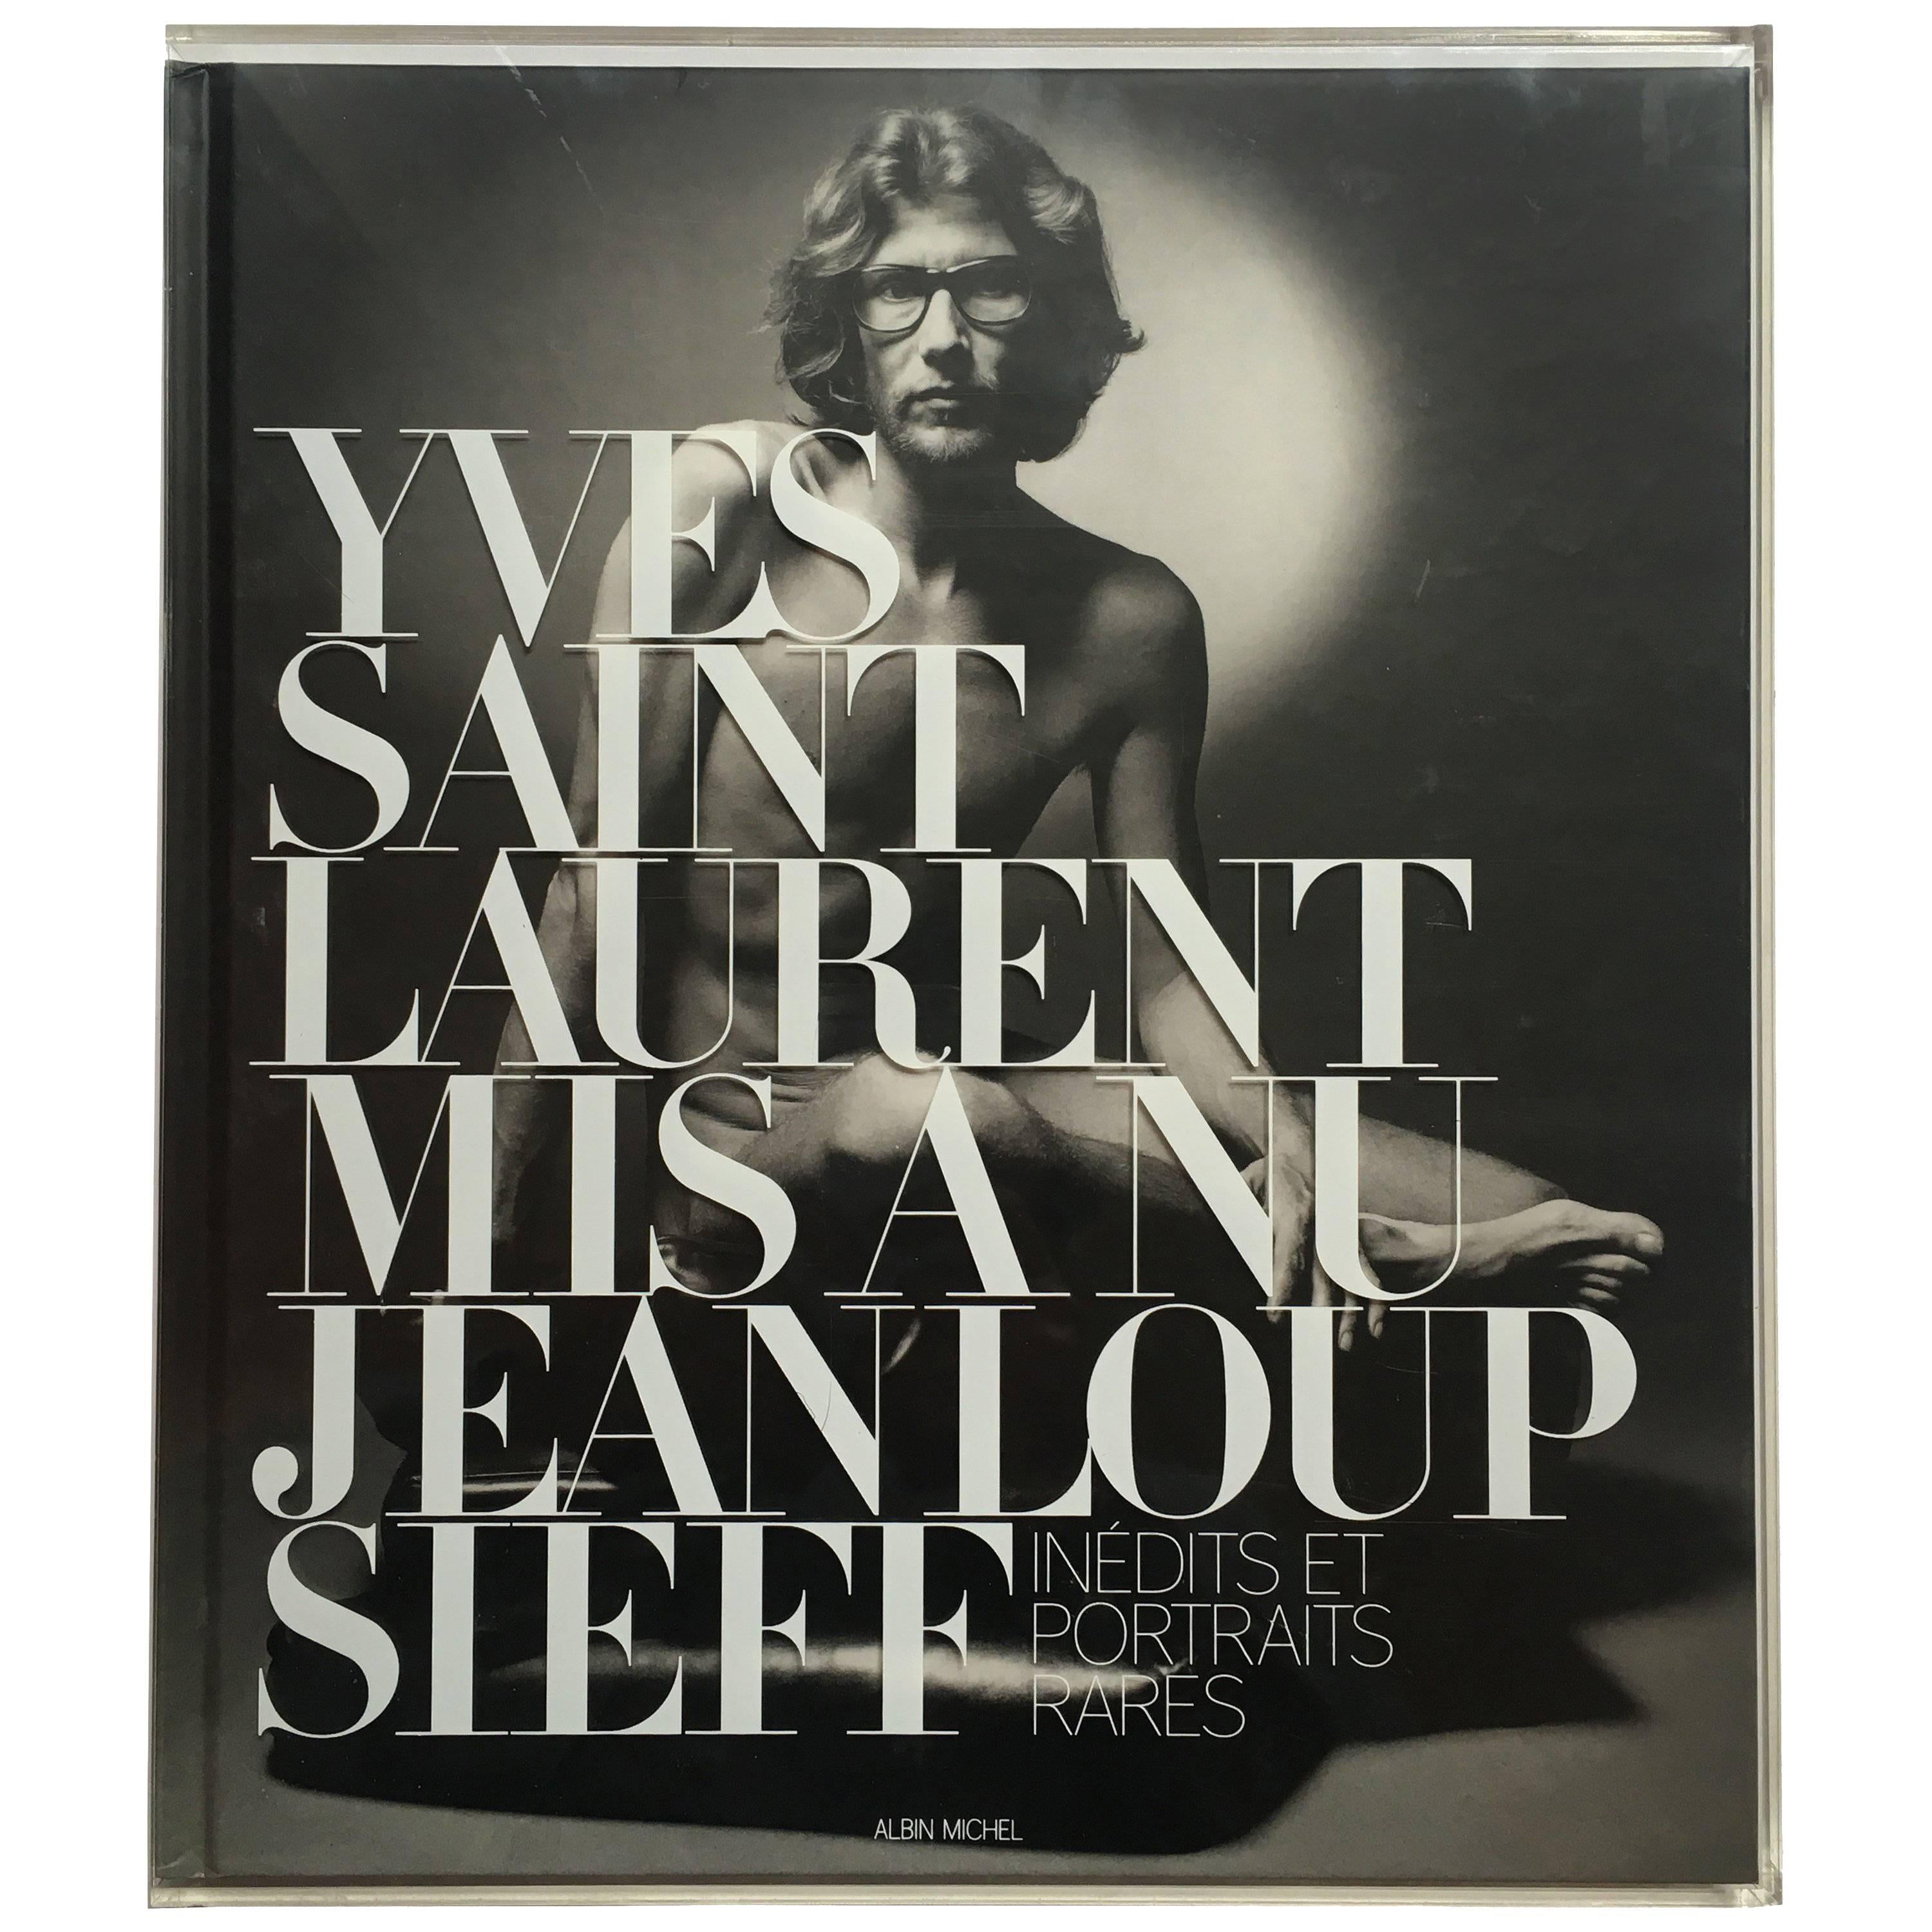 Yves Saint Laurent Empowered Individual Style with Gender-Blurring Designs  - 1stDibs Introspective